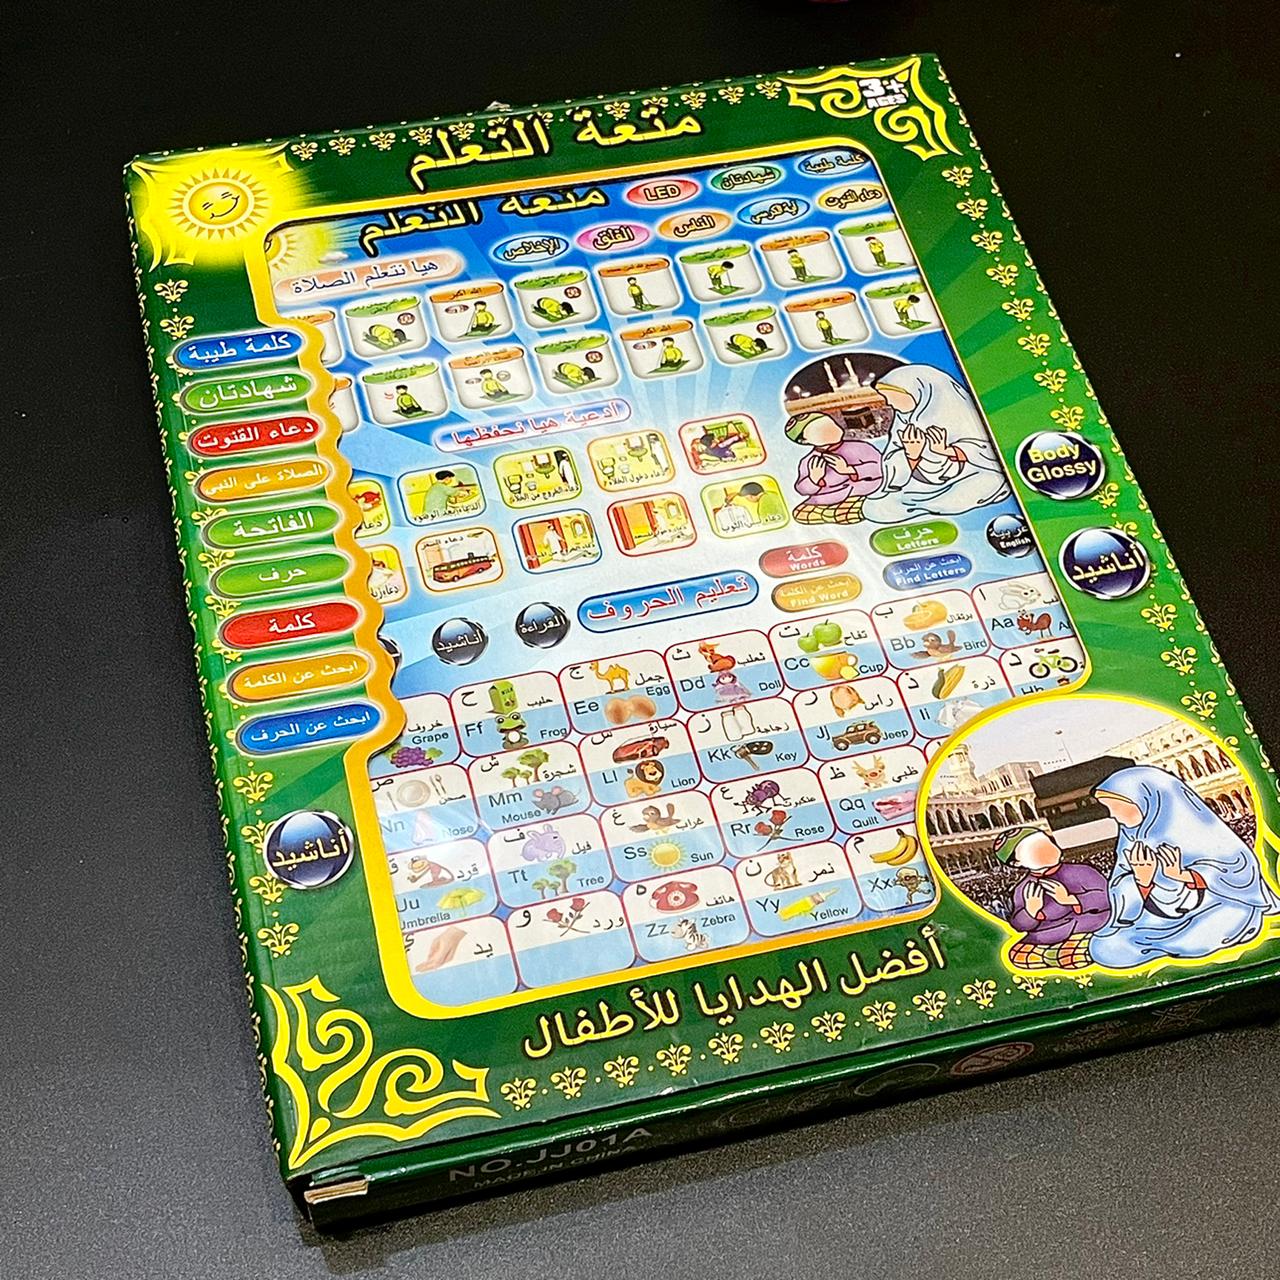 Educational Islamic Tablet Teaches Prayer Arabic and English Spelling Letters and Multiple Quran Falls and Prayer